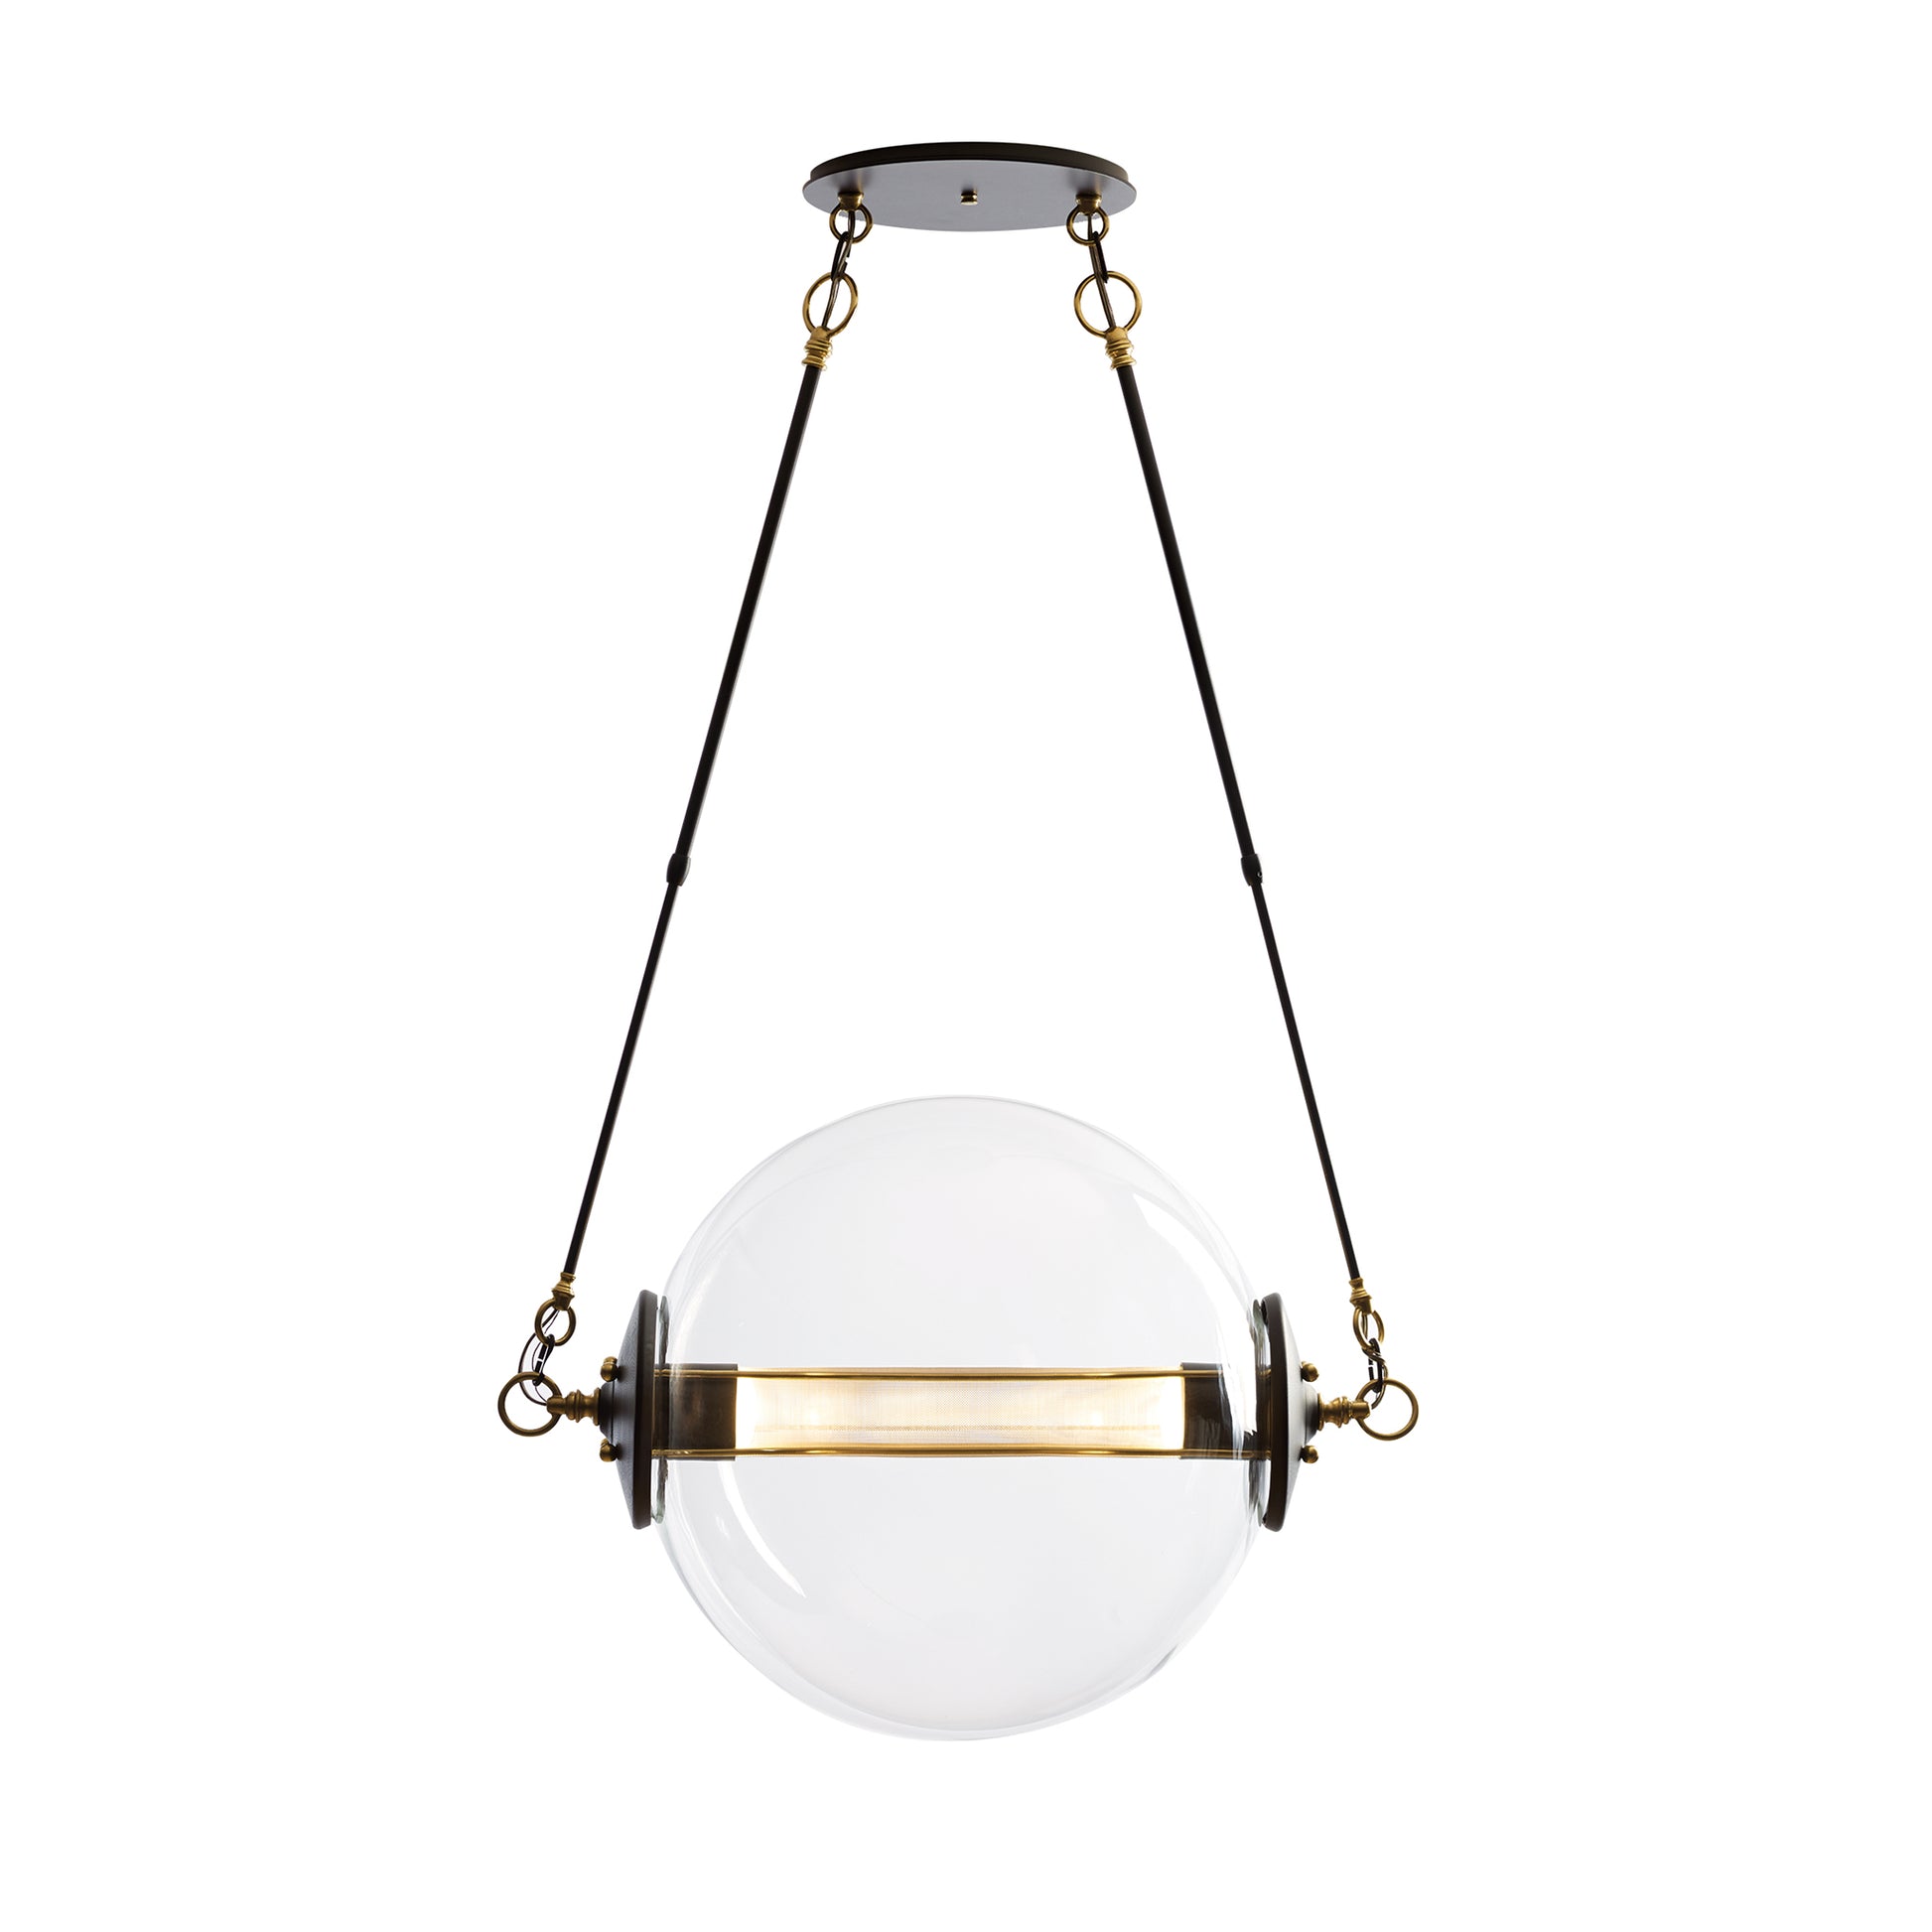 A Otto Sphere Pendant light fixture by Hubbardton Forge, with a glass globe hanging from it, perfect for lighting up any space.